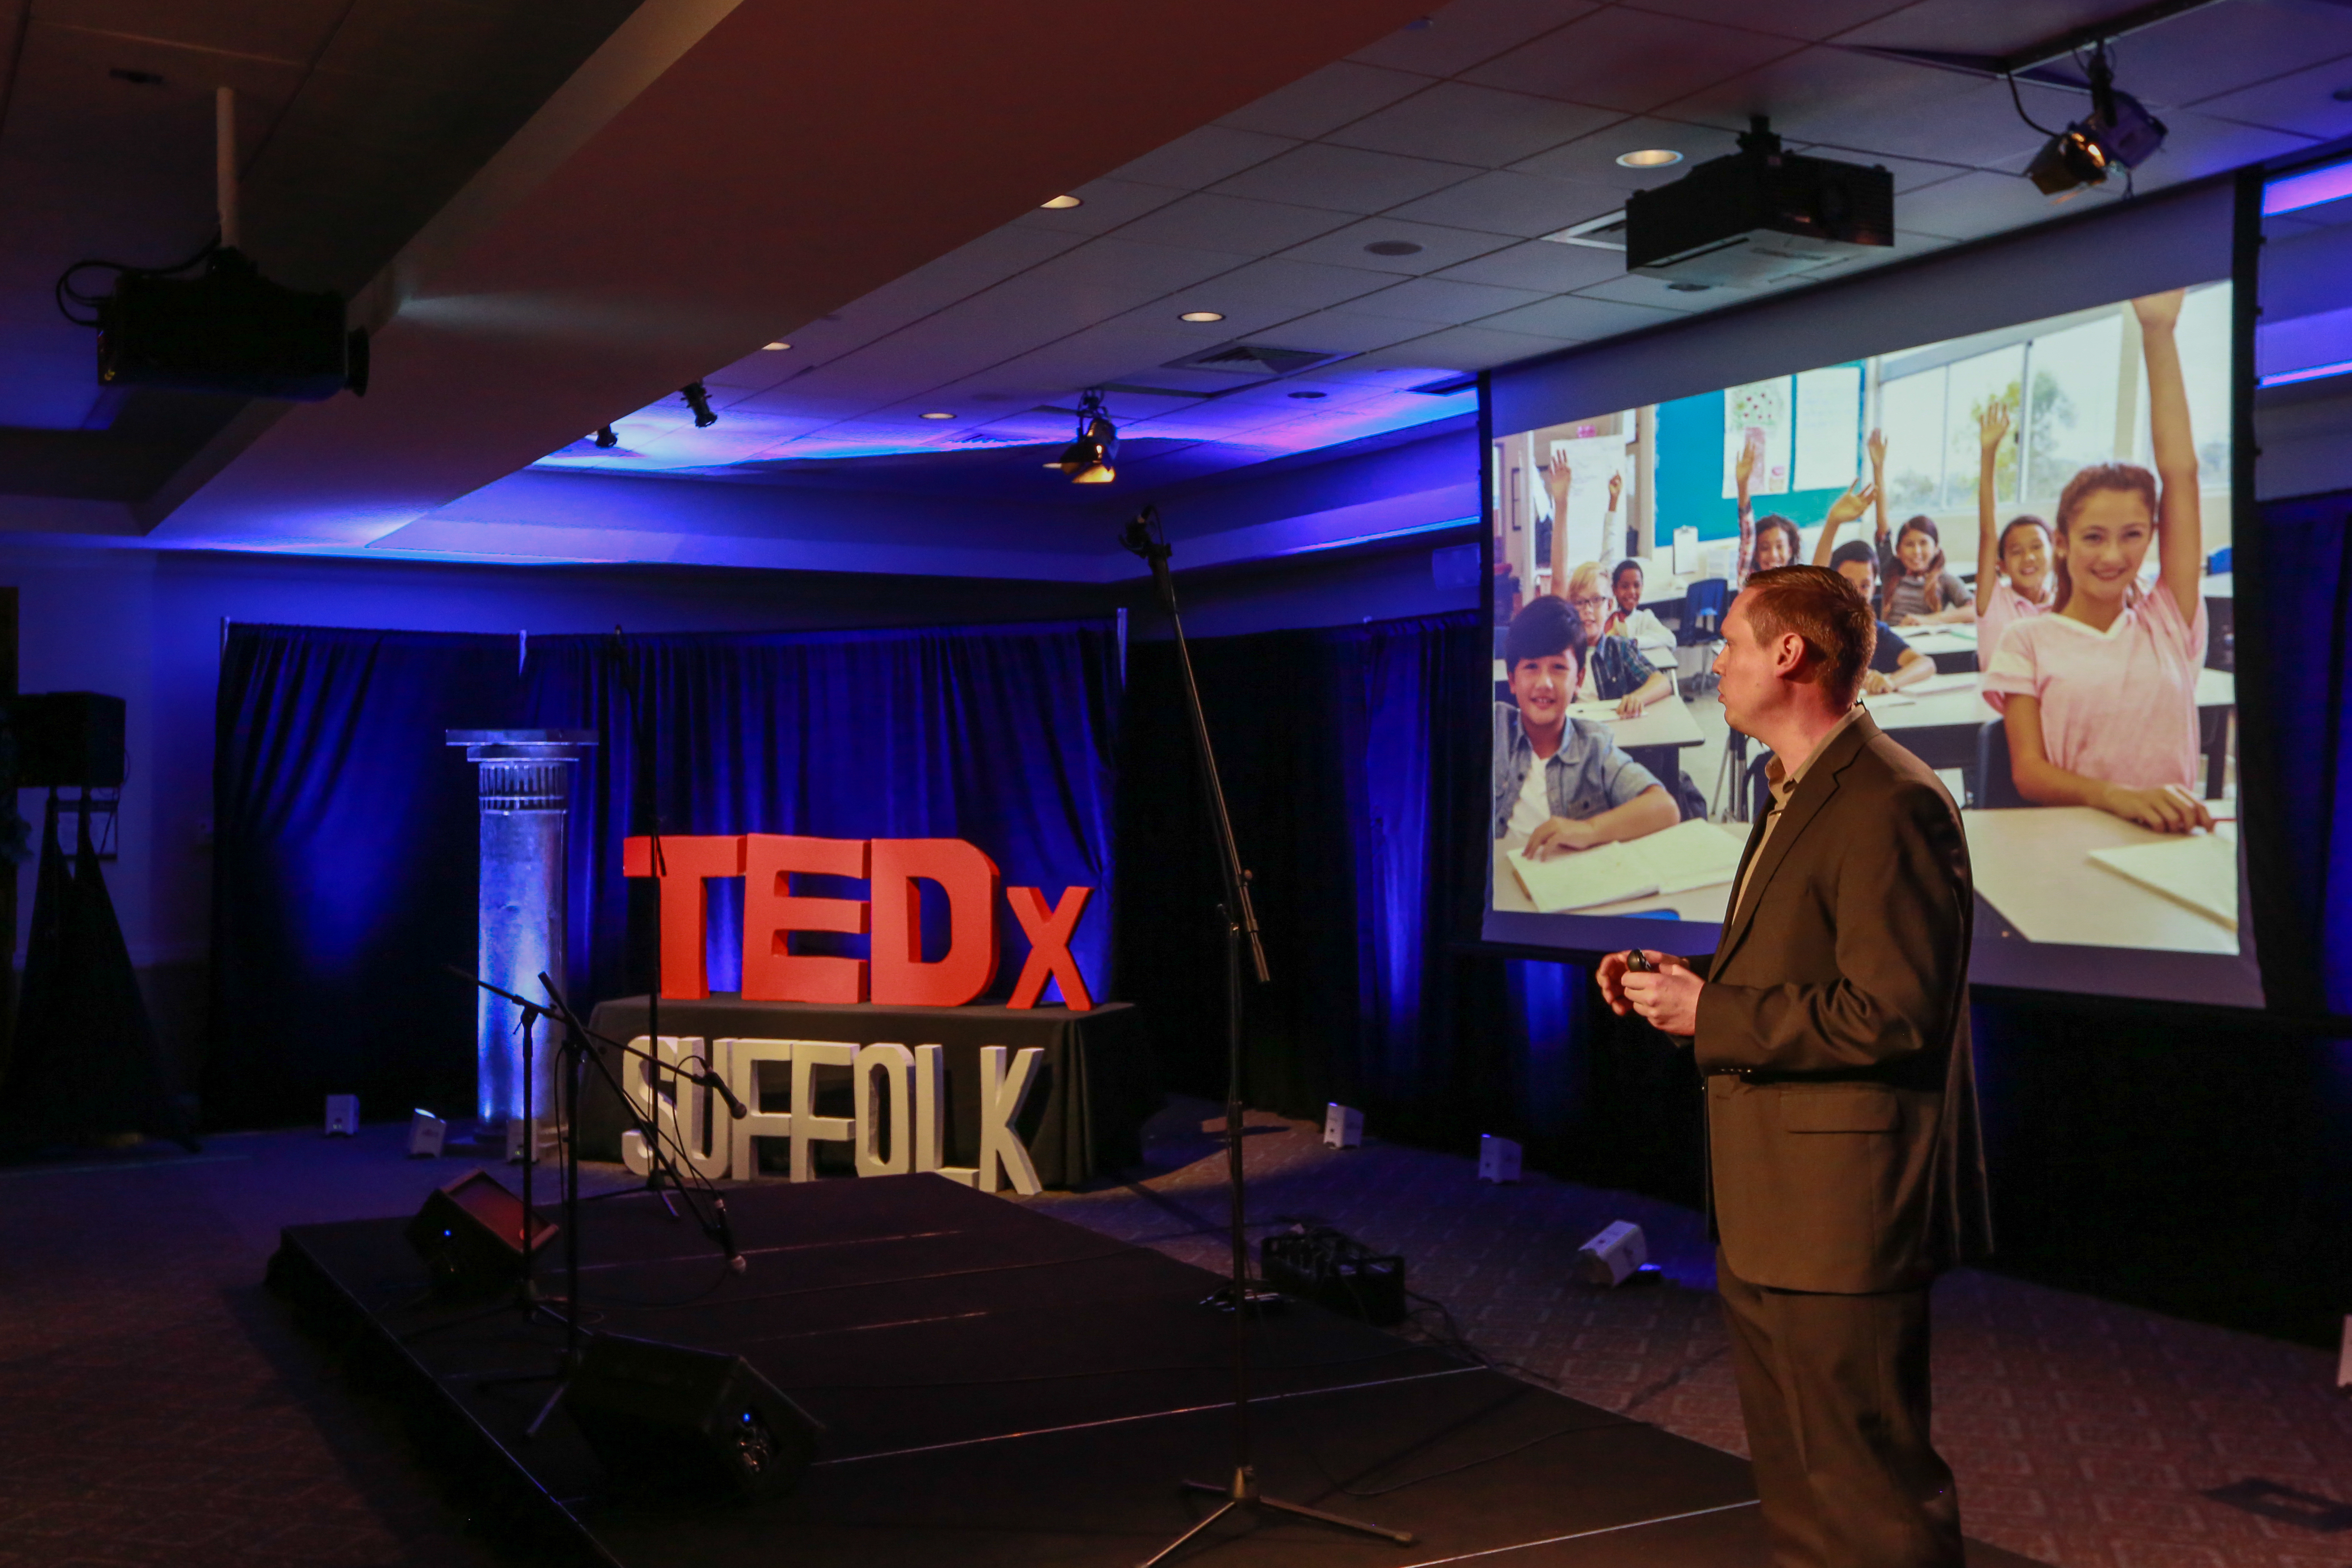 Intergalactic Education's Justin Park speaks at Tedx@Suffolk on the space economy